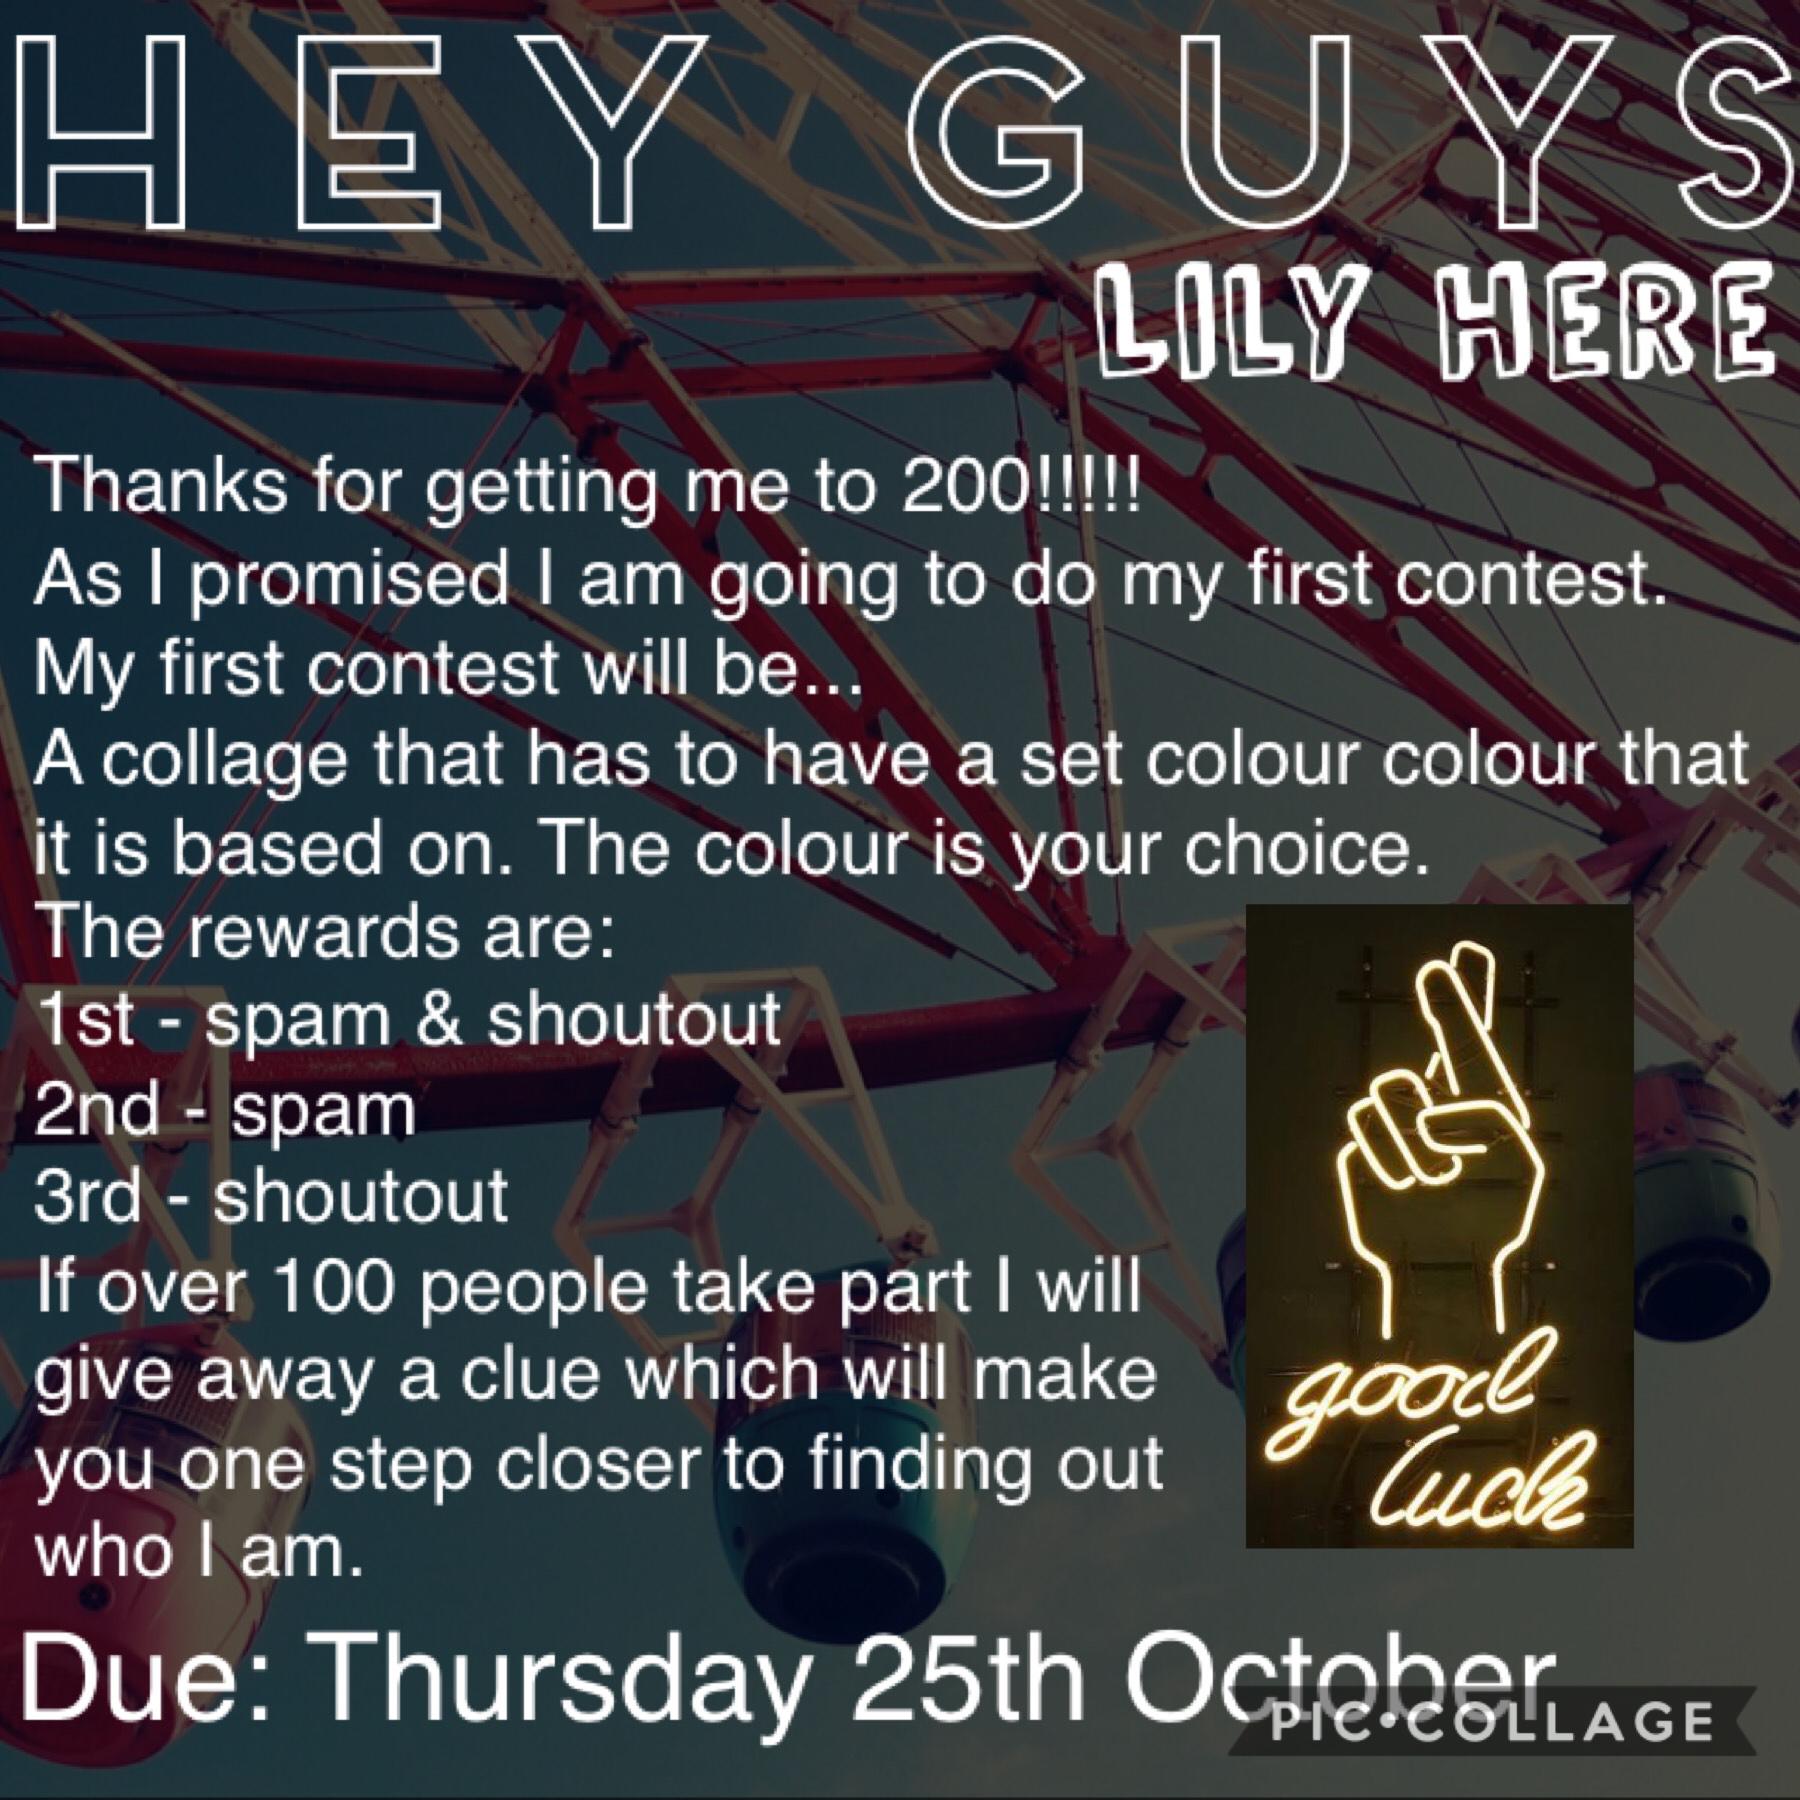 Hey guys (tap)
Thank you soooooo much for 200 followers. This really means a lot to me. Good luck with the contest. Can’t wait to see what you guys creat. Btw to it in the remixes.
Lily❤️